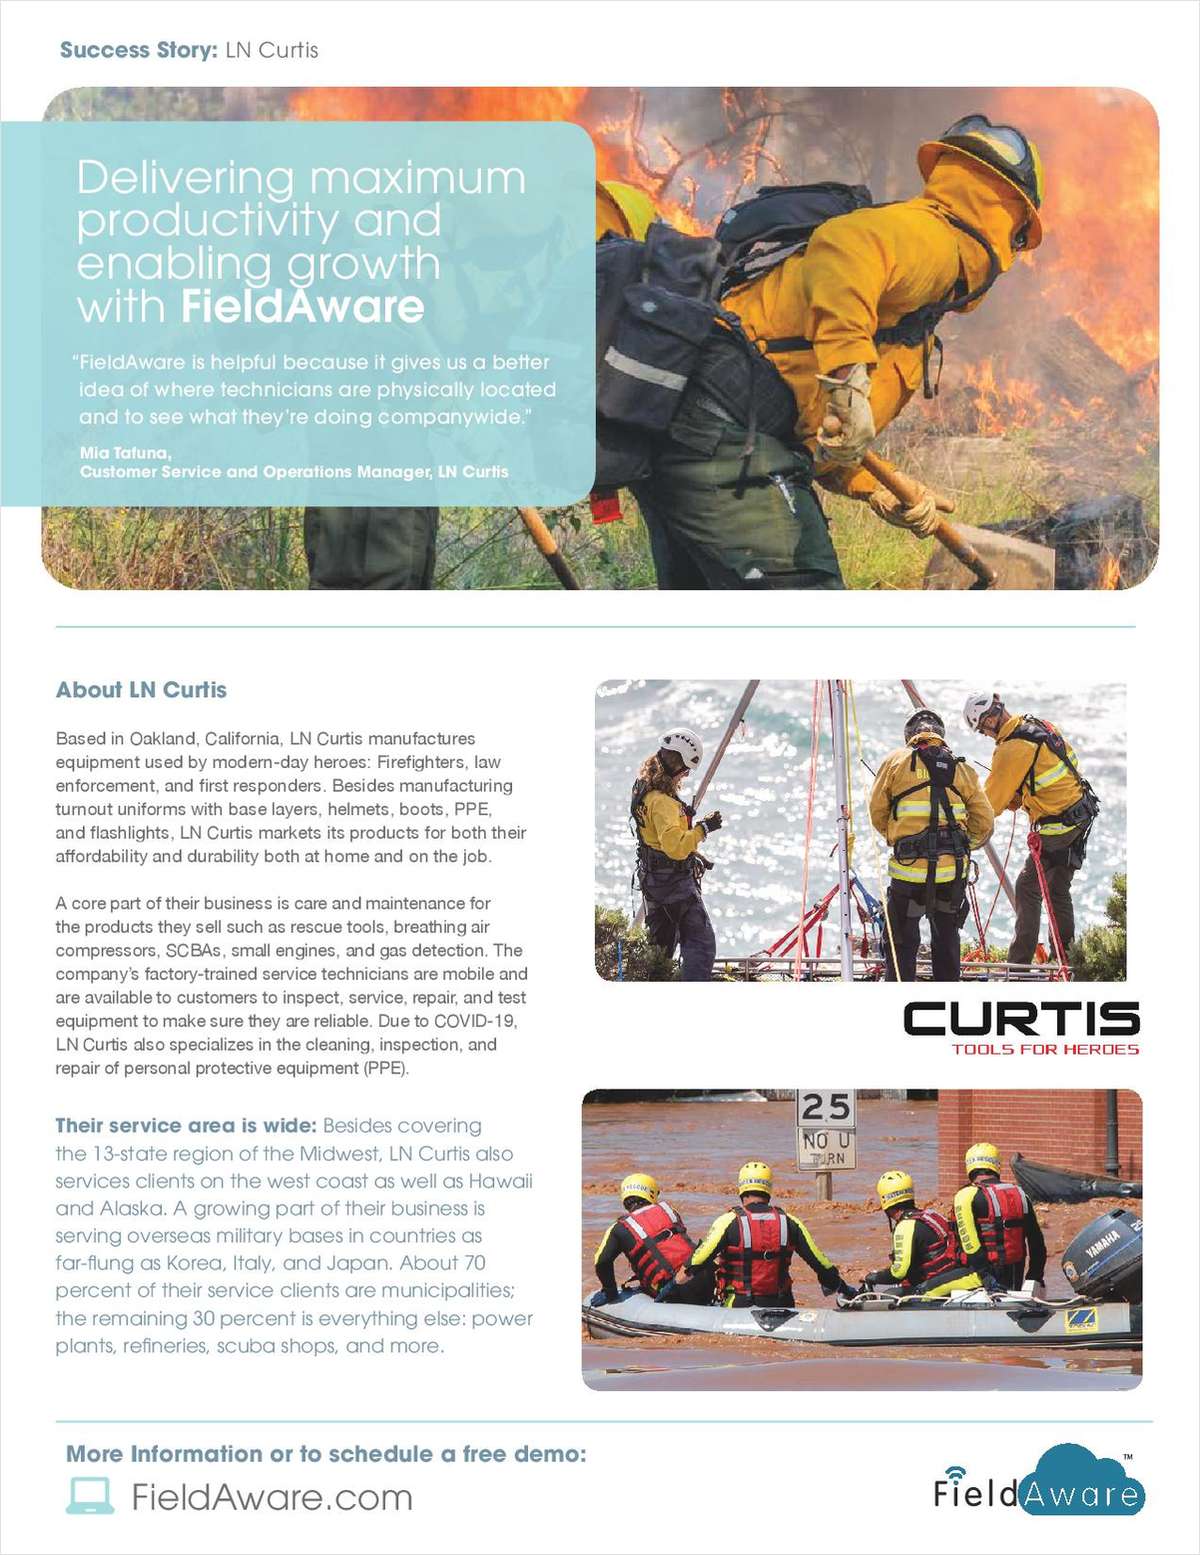 Fire, Safety & Security Field Service - LN Curtis Case Study